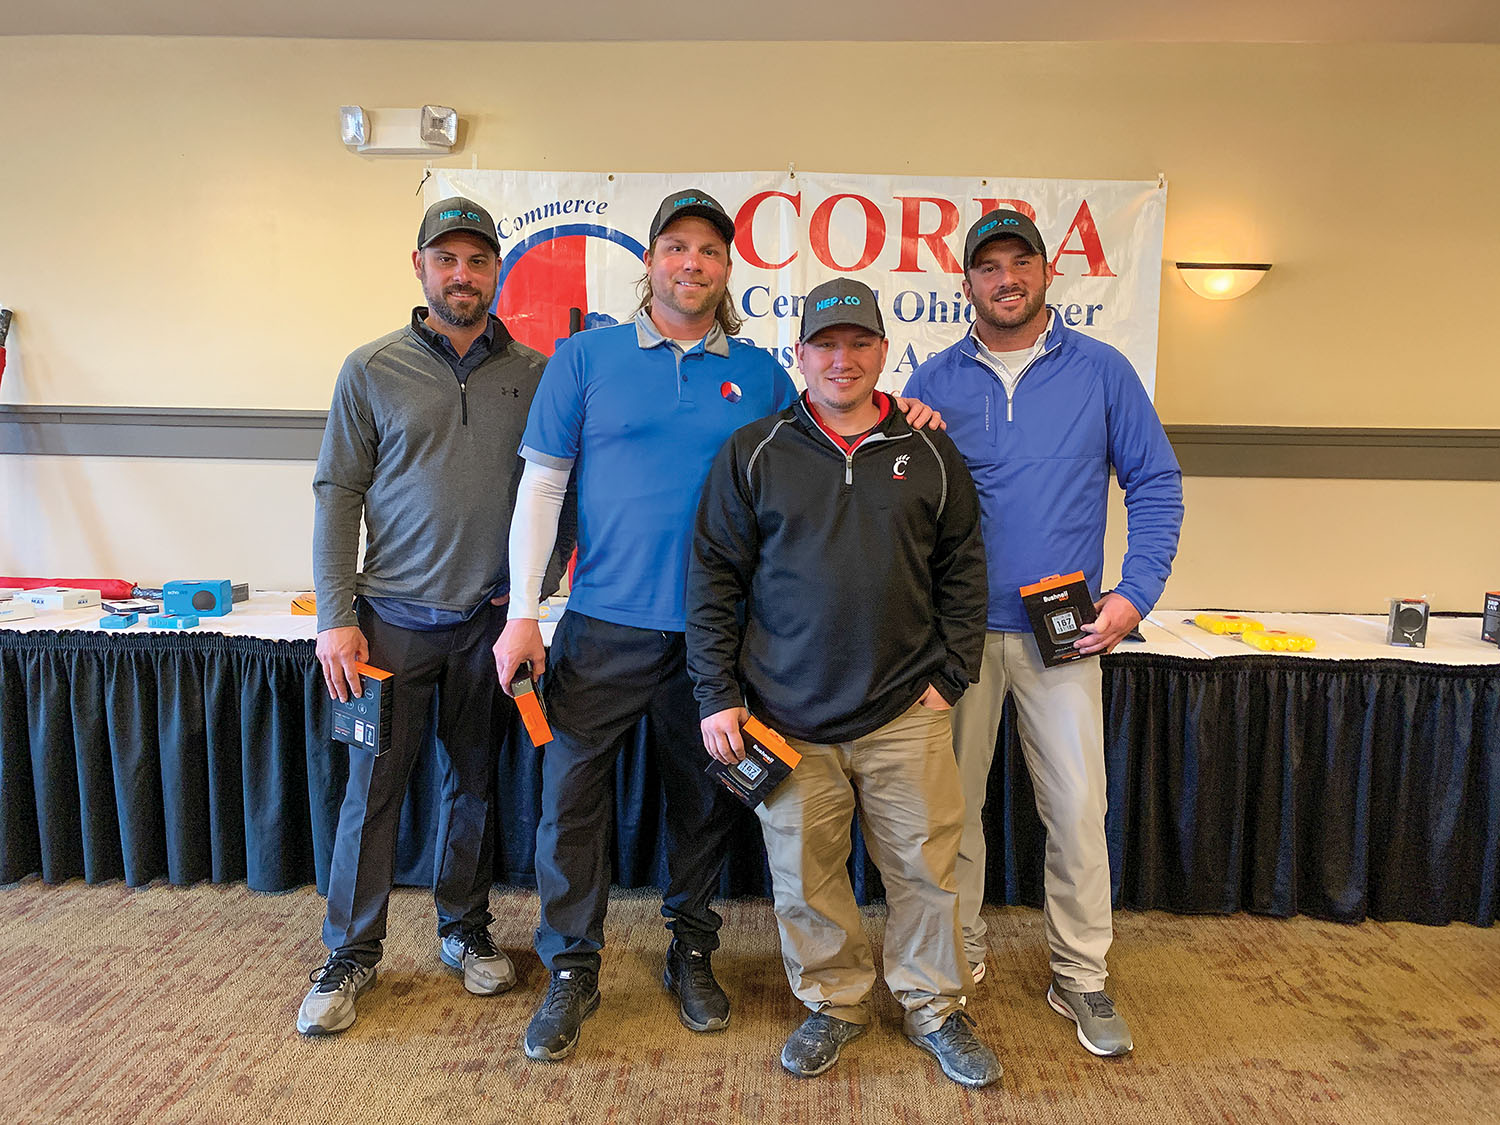 CORBA Hosts Golf Outing